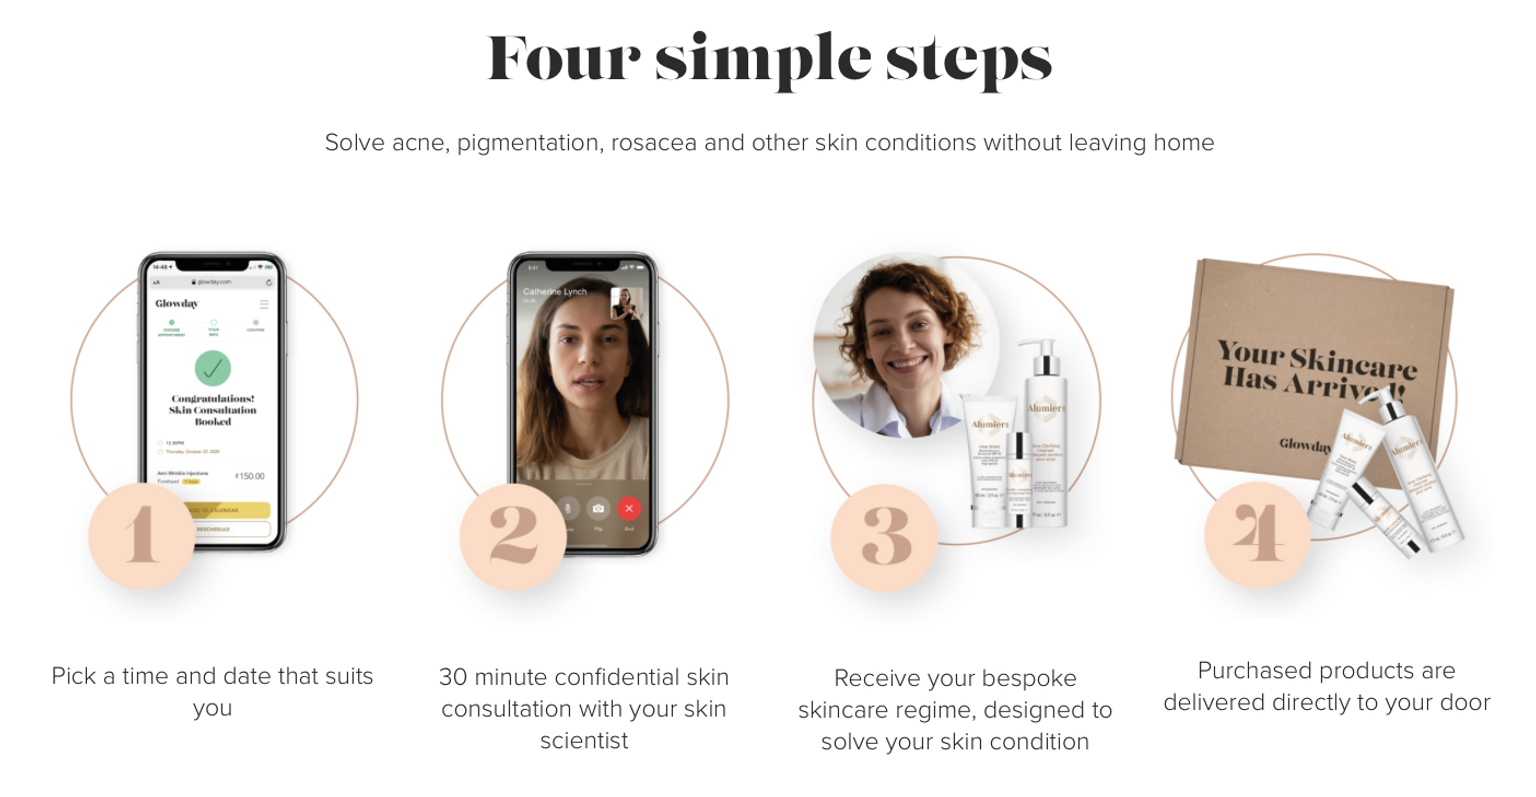 1.  Pick a time and date 2. 30min confidential skin consultation 3. Bespoke skincare regime designed for you by our Skin Expert 4. Purchased products delivered to your door